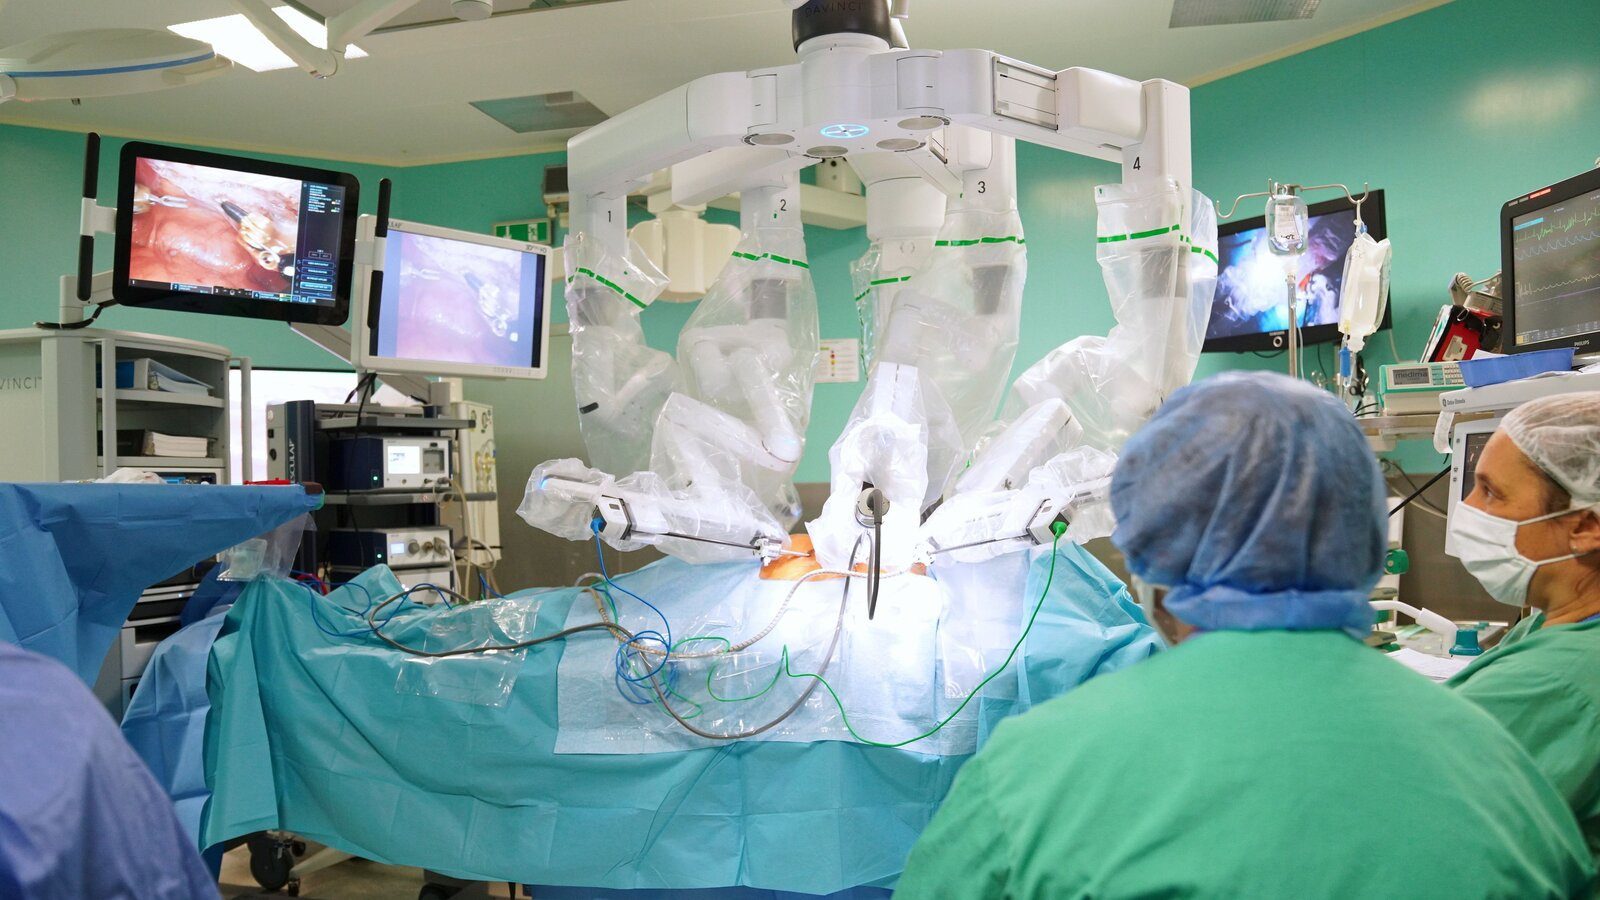 Surgical Robotics Firm Secures $110M and Digital Health Funds